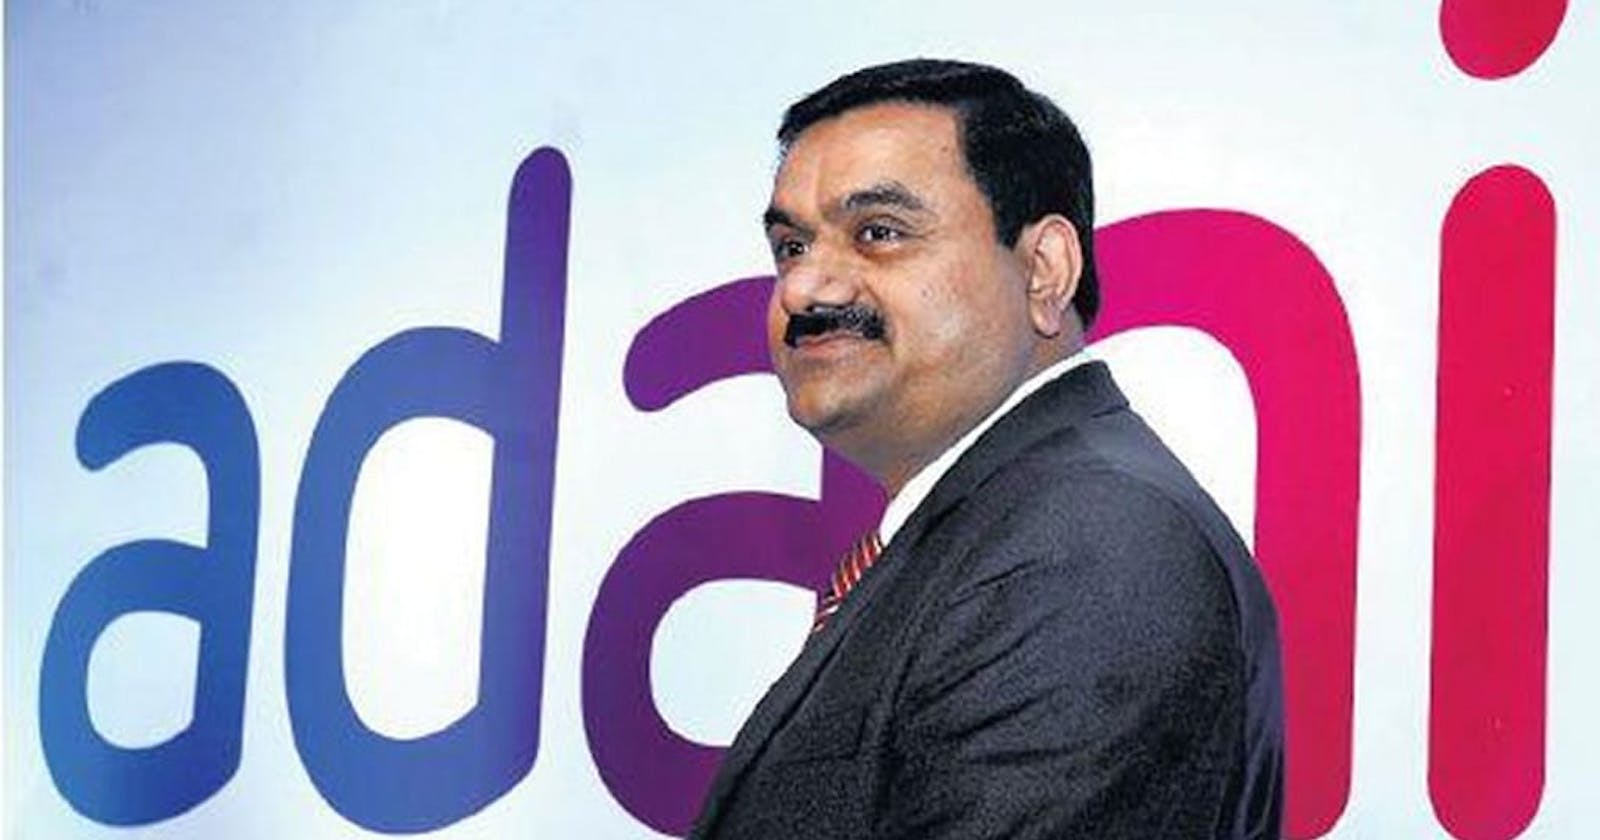 Adani hires Grant Thornton for some independent audits after Hindenburg fallout: Report